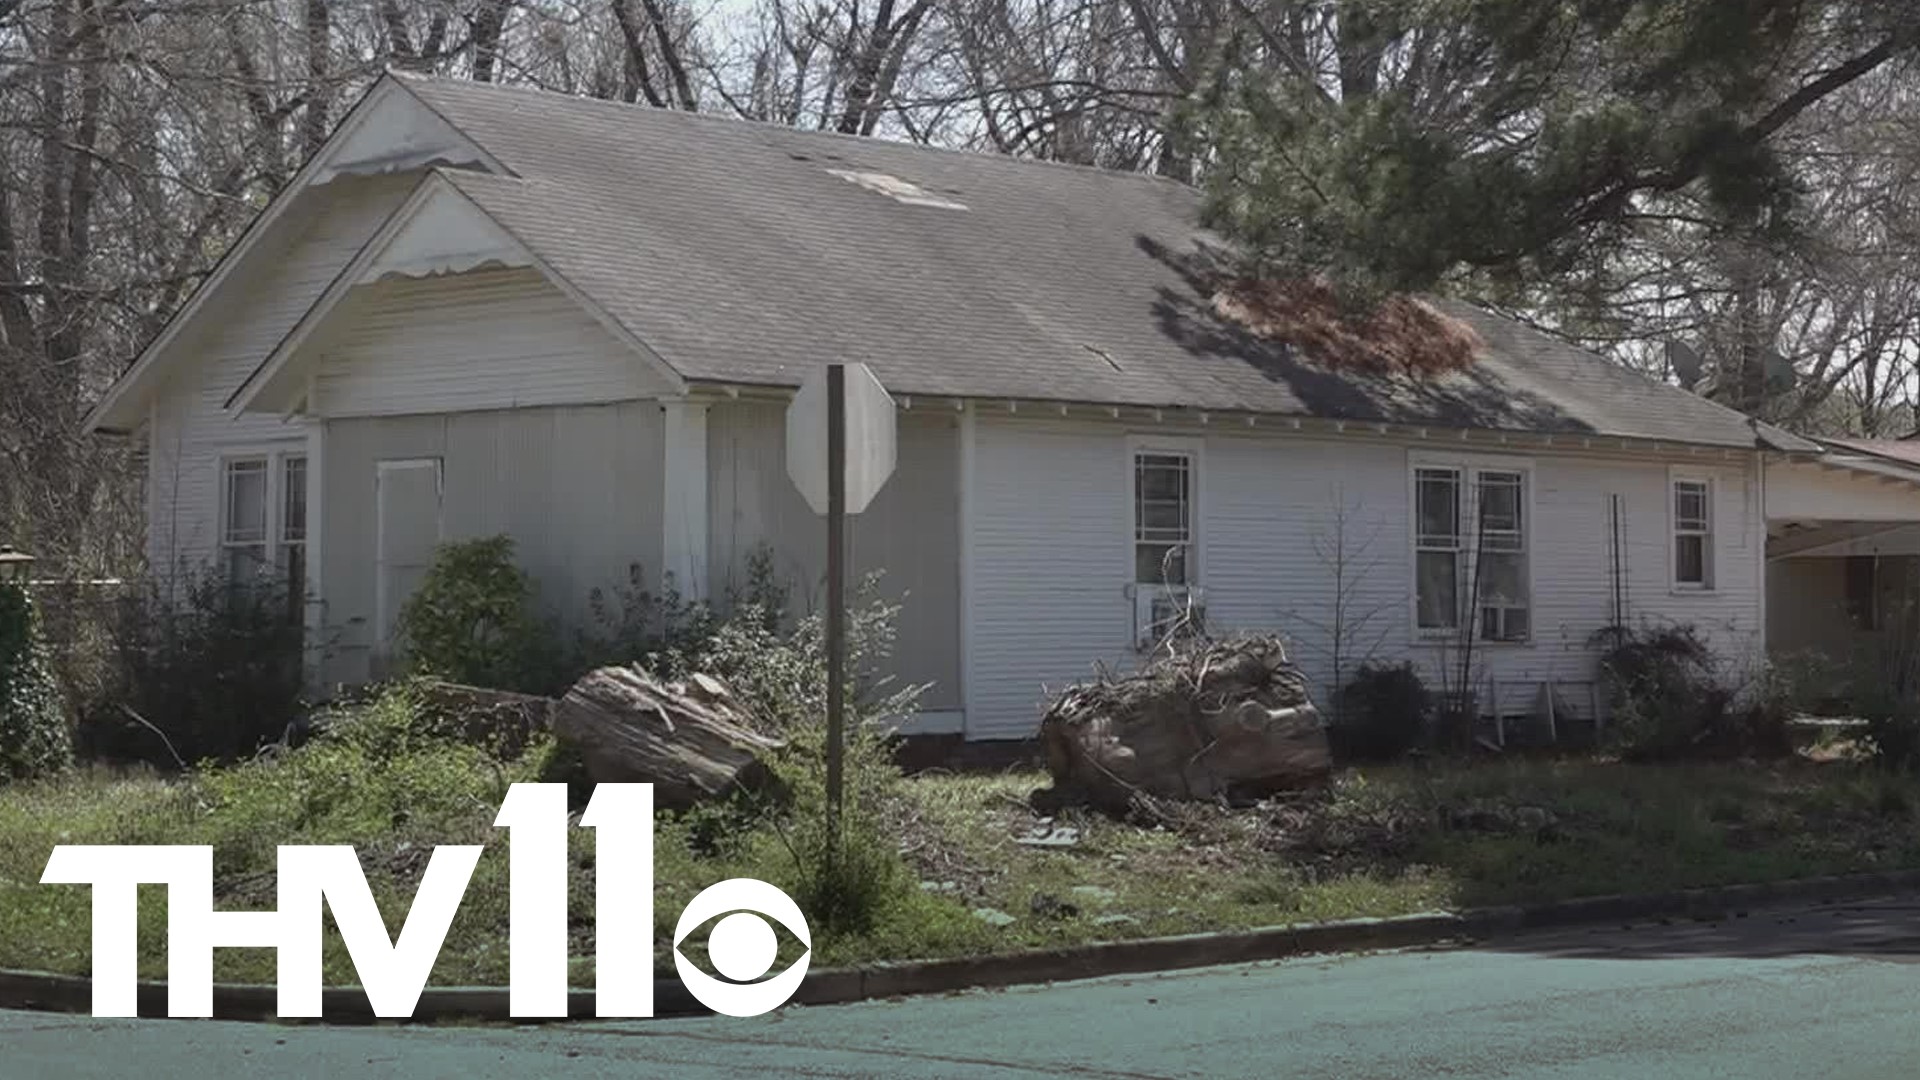 City leaders in Pine Bluff are trying a new approach to spark a resurgence. Starting in April, some people can expect a visit if their property isn't up to code.